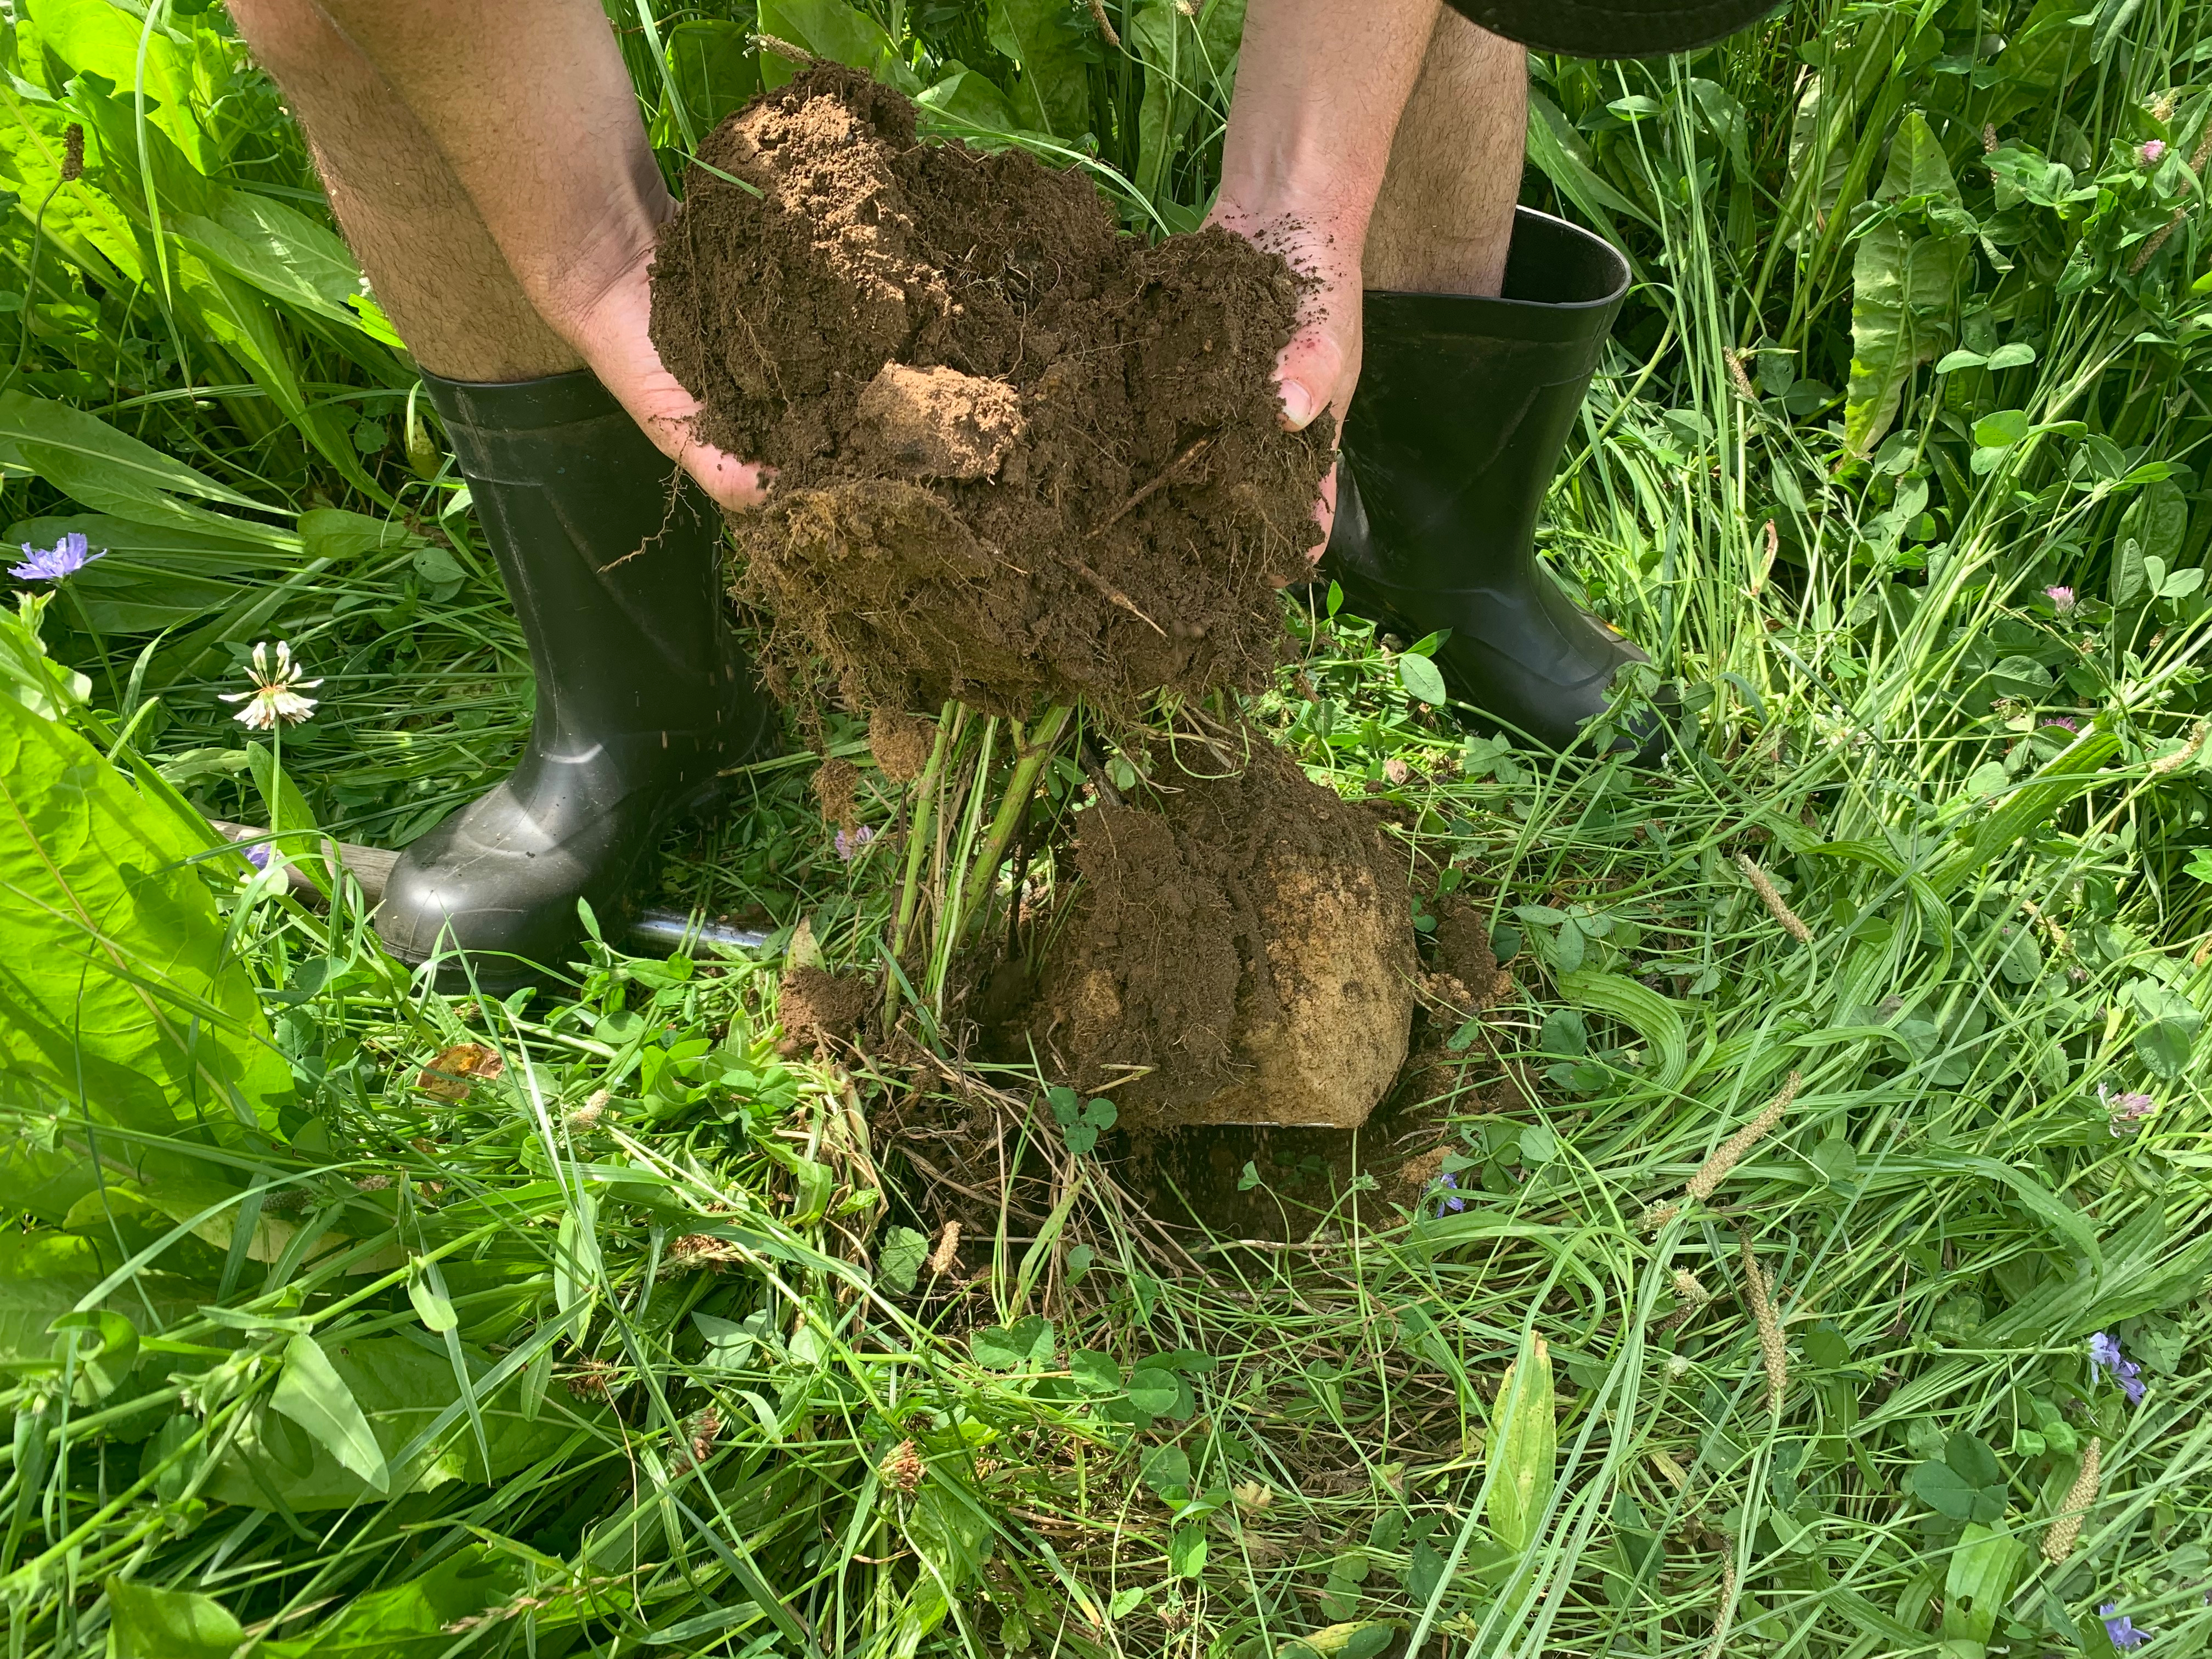 Why is microBIOMETER® the best test for soil health?